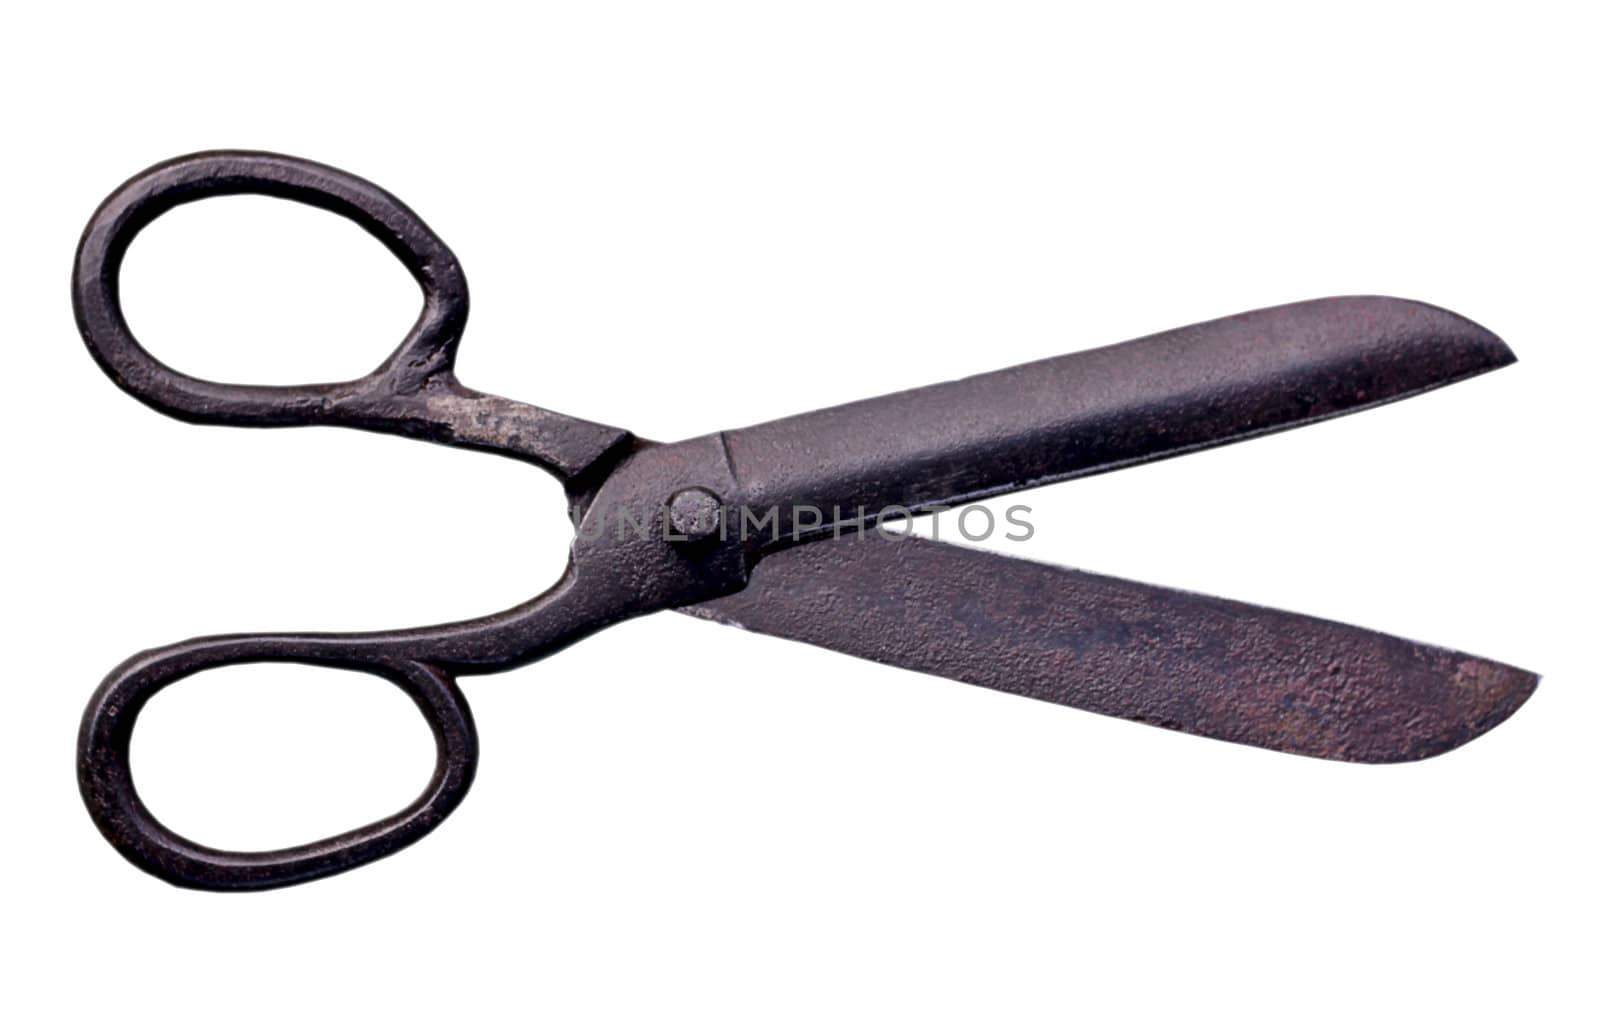 A pair of rusty old scissors or seamstress shears. Isolated